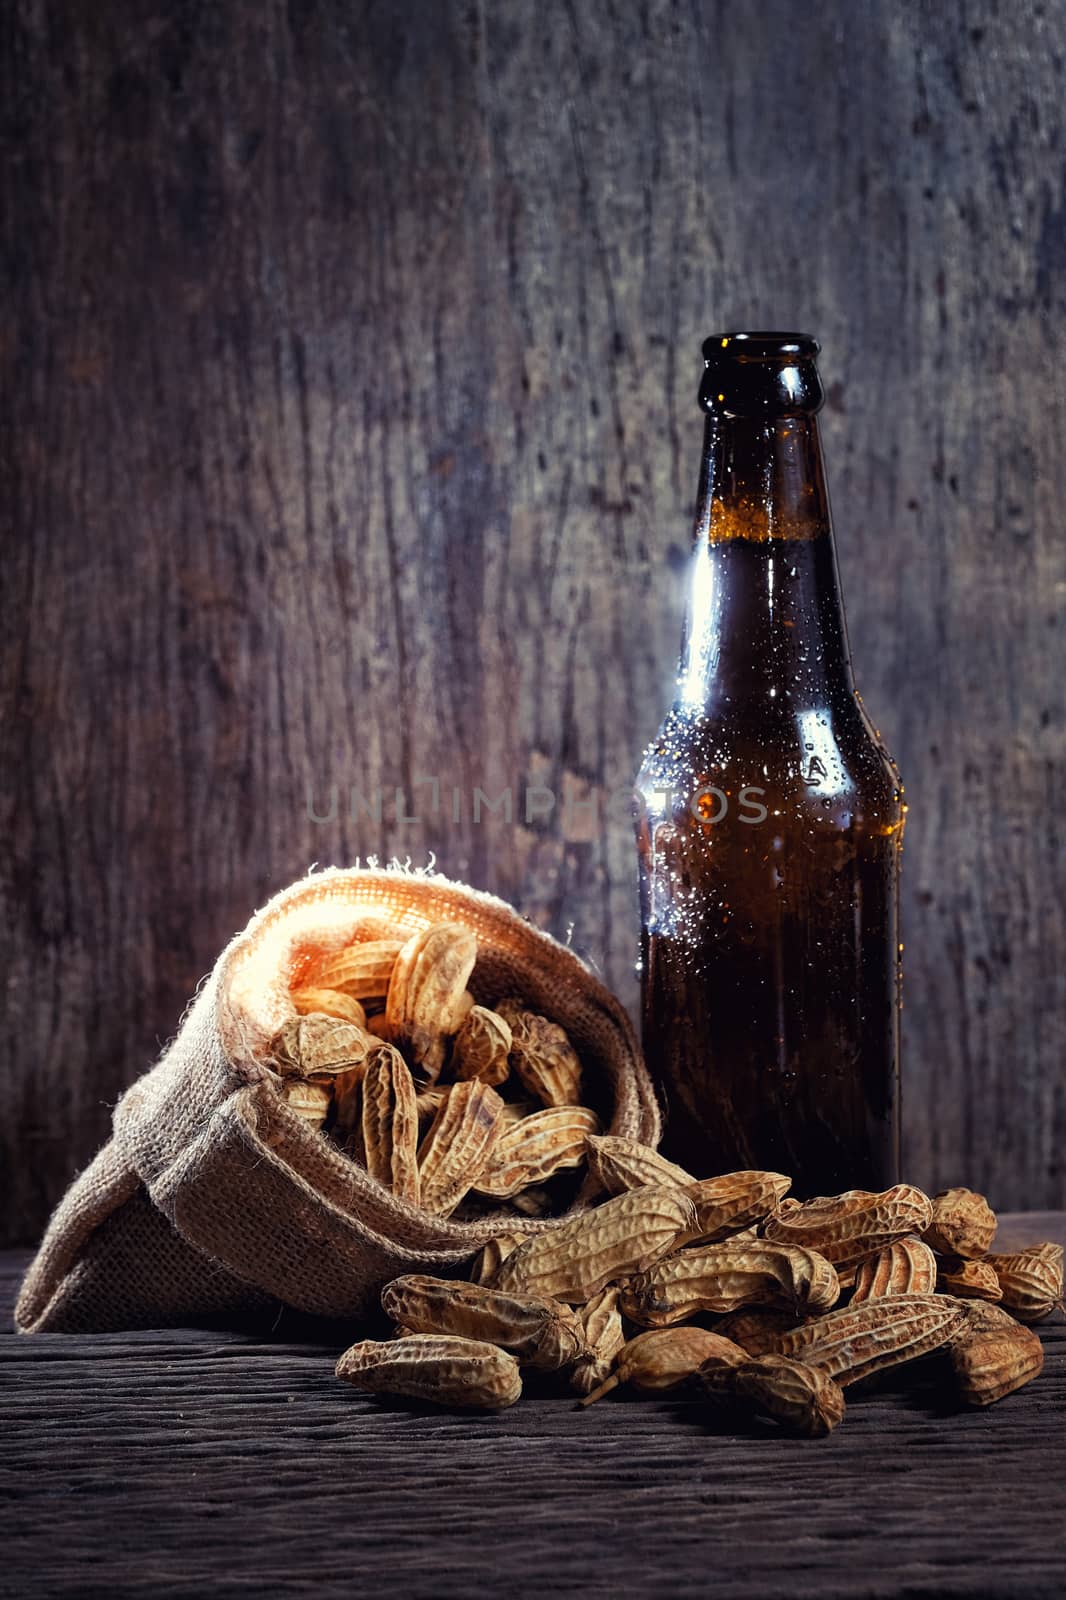 Peanuts and Beer bottle in wood background
 by Surasak